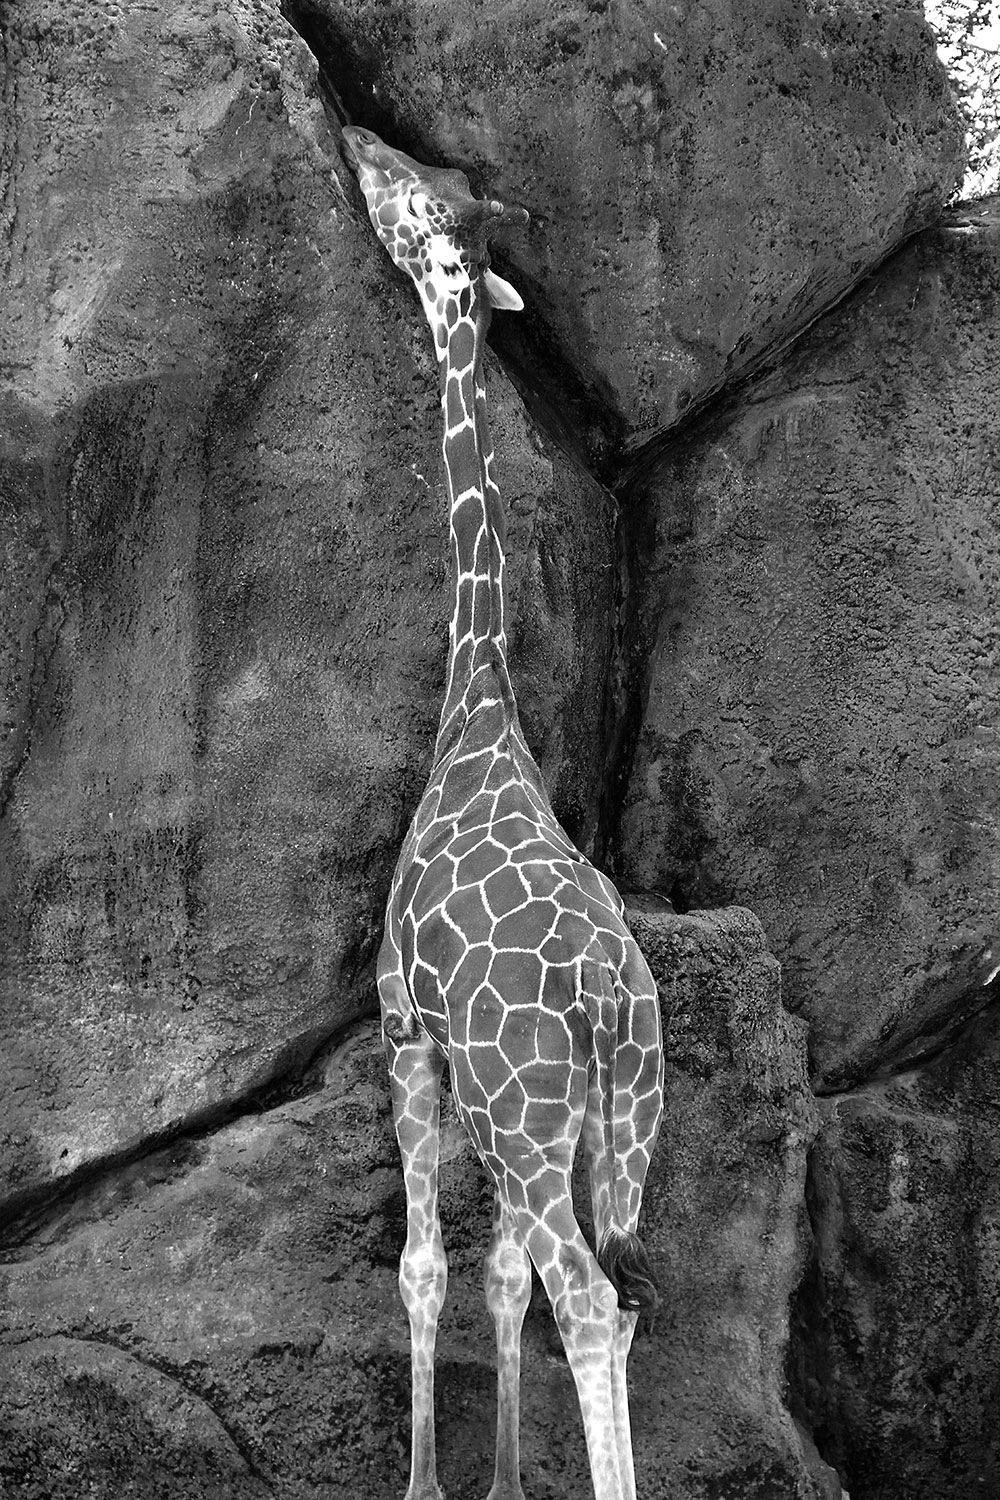 Black and white image of a giraffe in front of stones